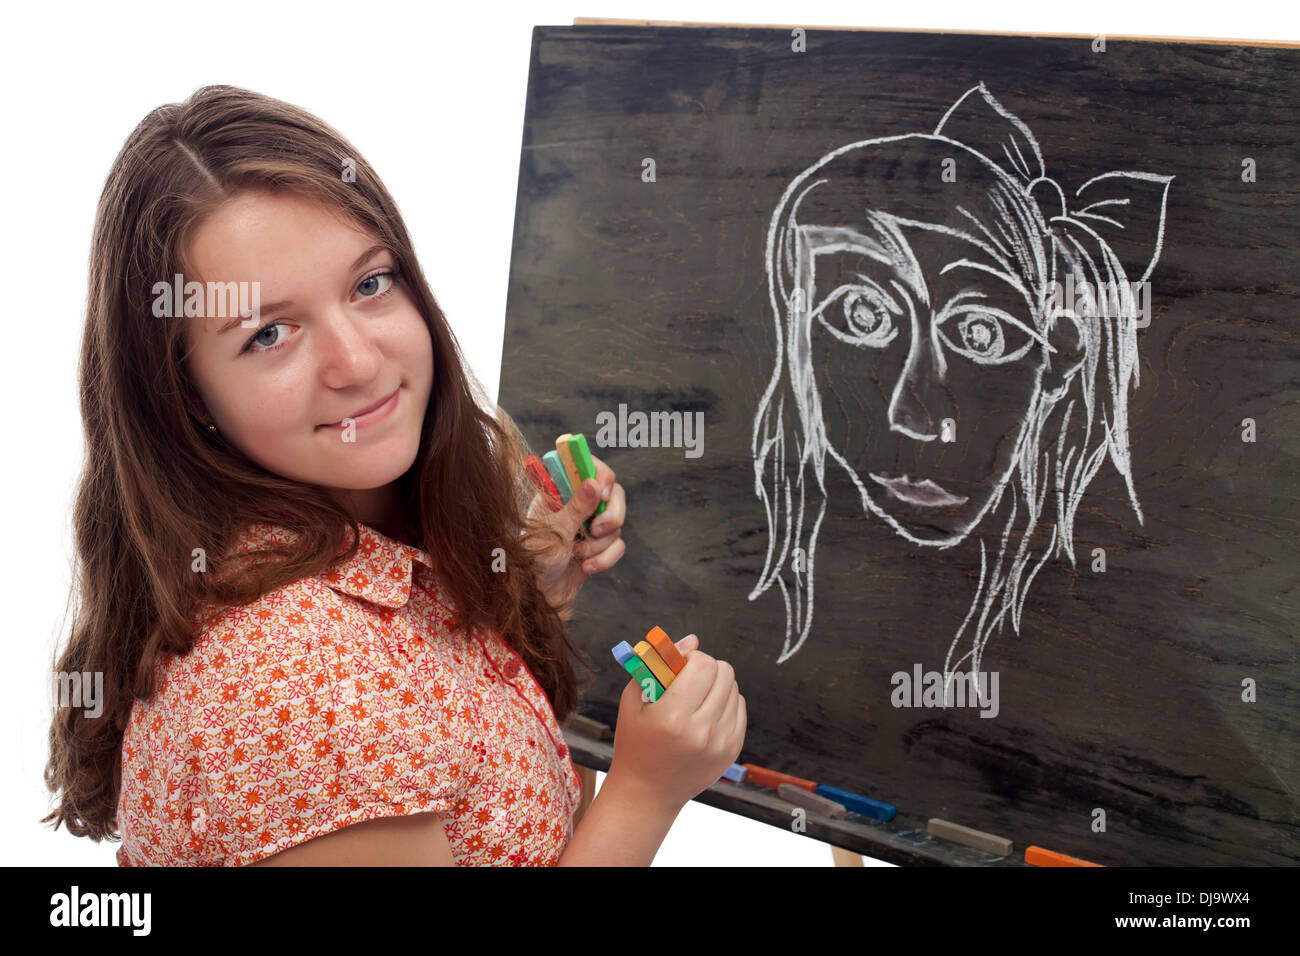 Young artist student drawing on black board with colored chalk Stock Photo